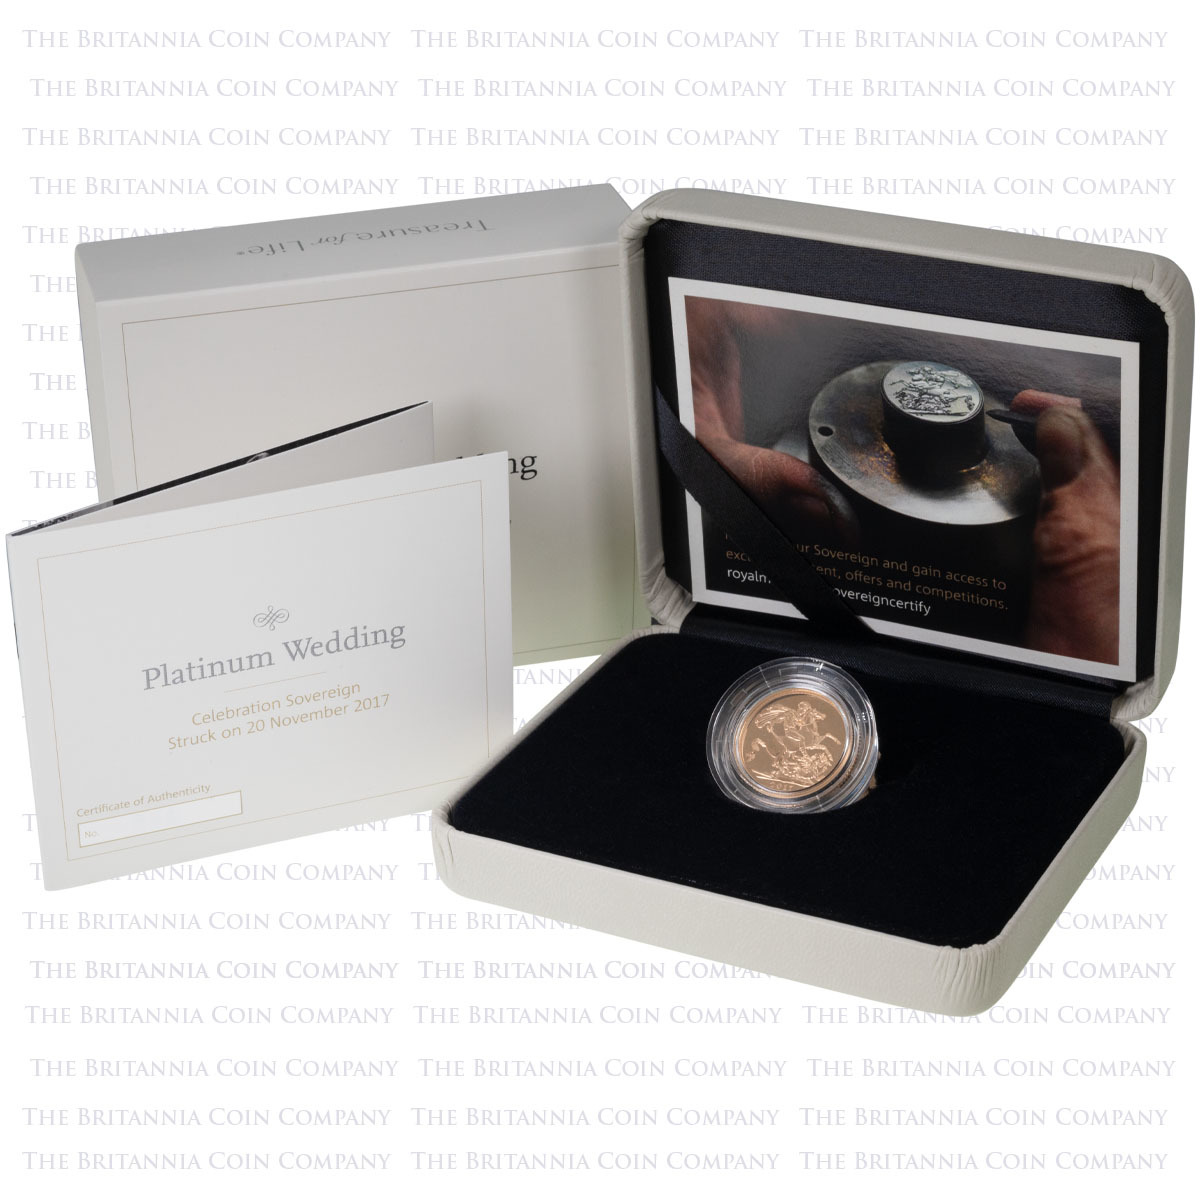 PW17STD 2017 Struck On The Day Brilliant Uncirculated Full Gold Sovereign Platinum Wedding Anniversary Coin Boxed